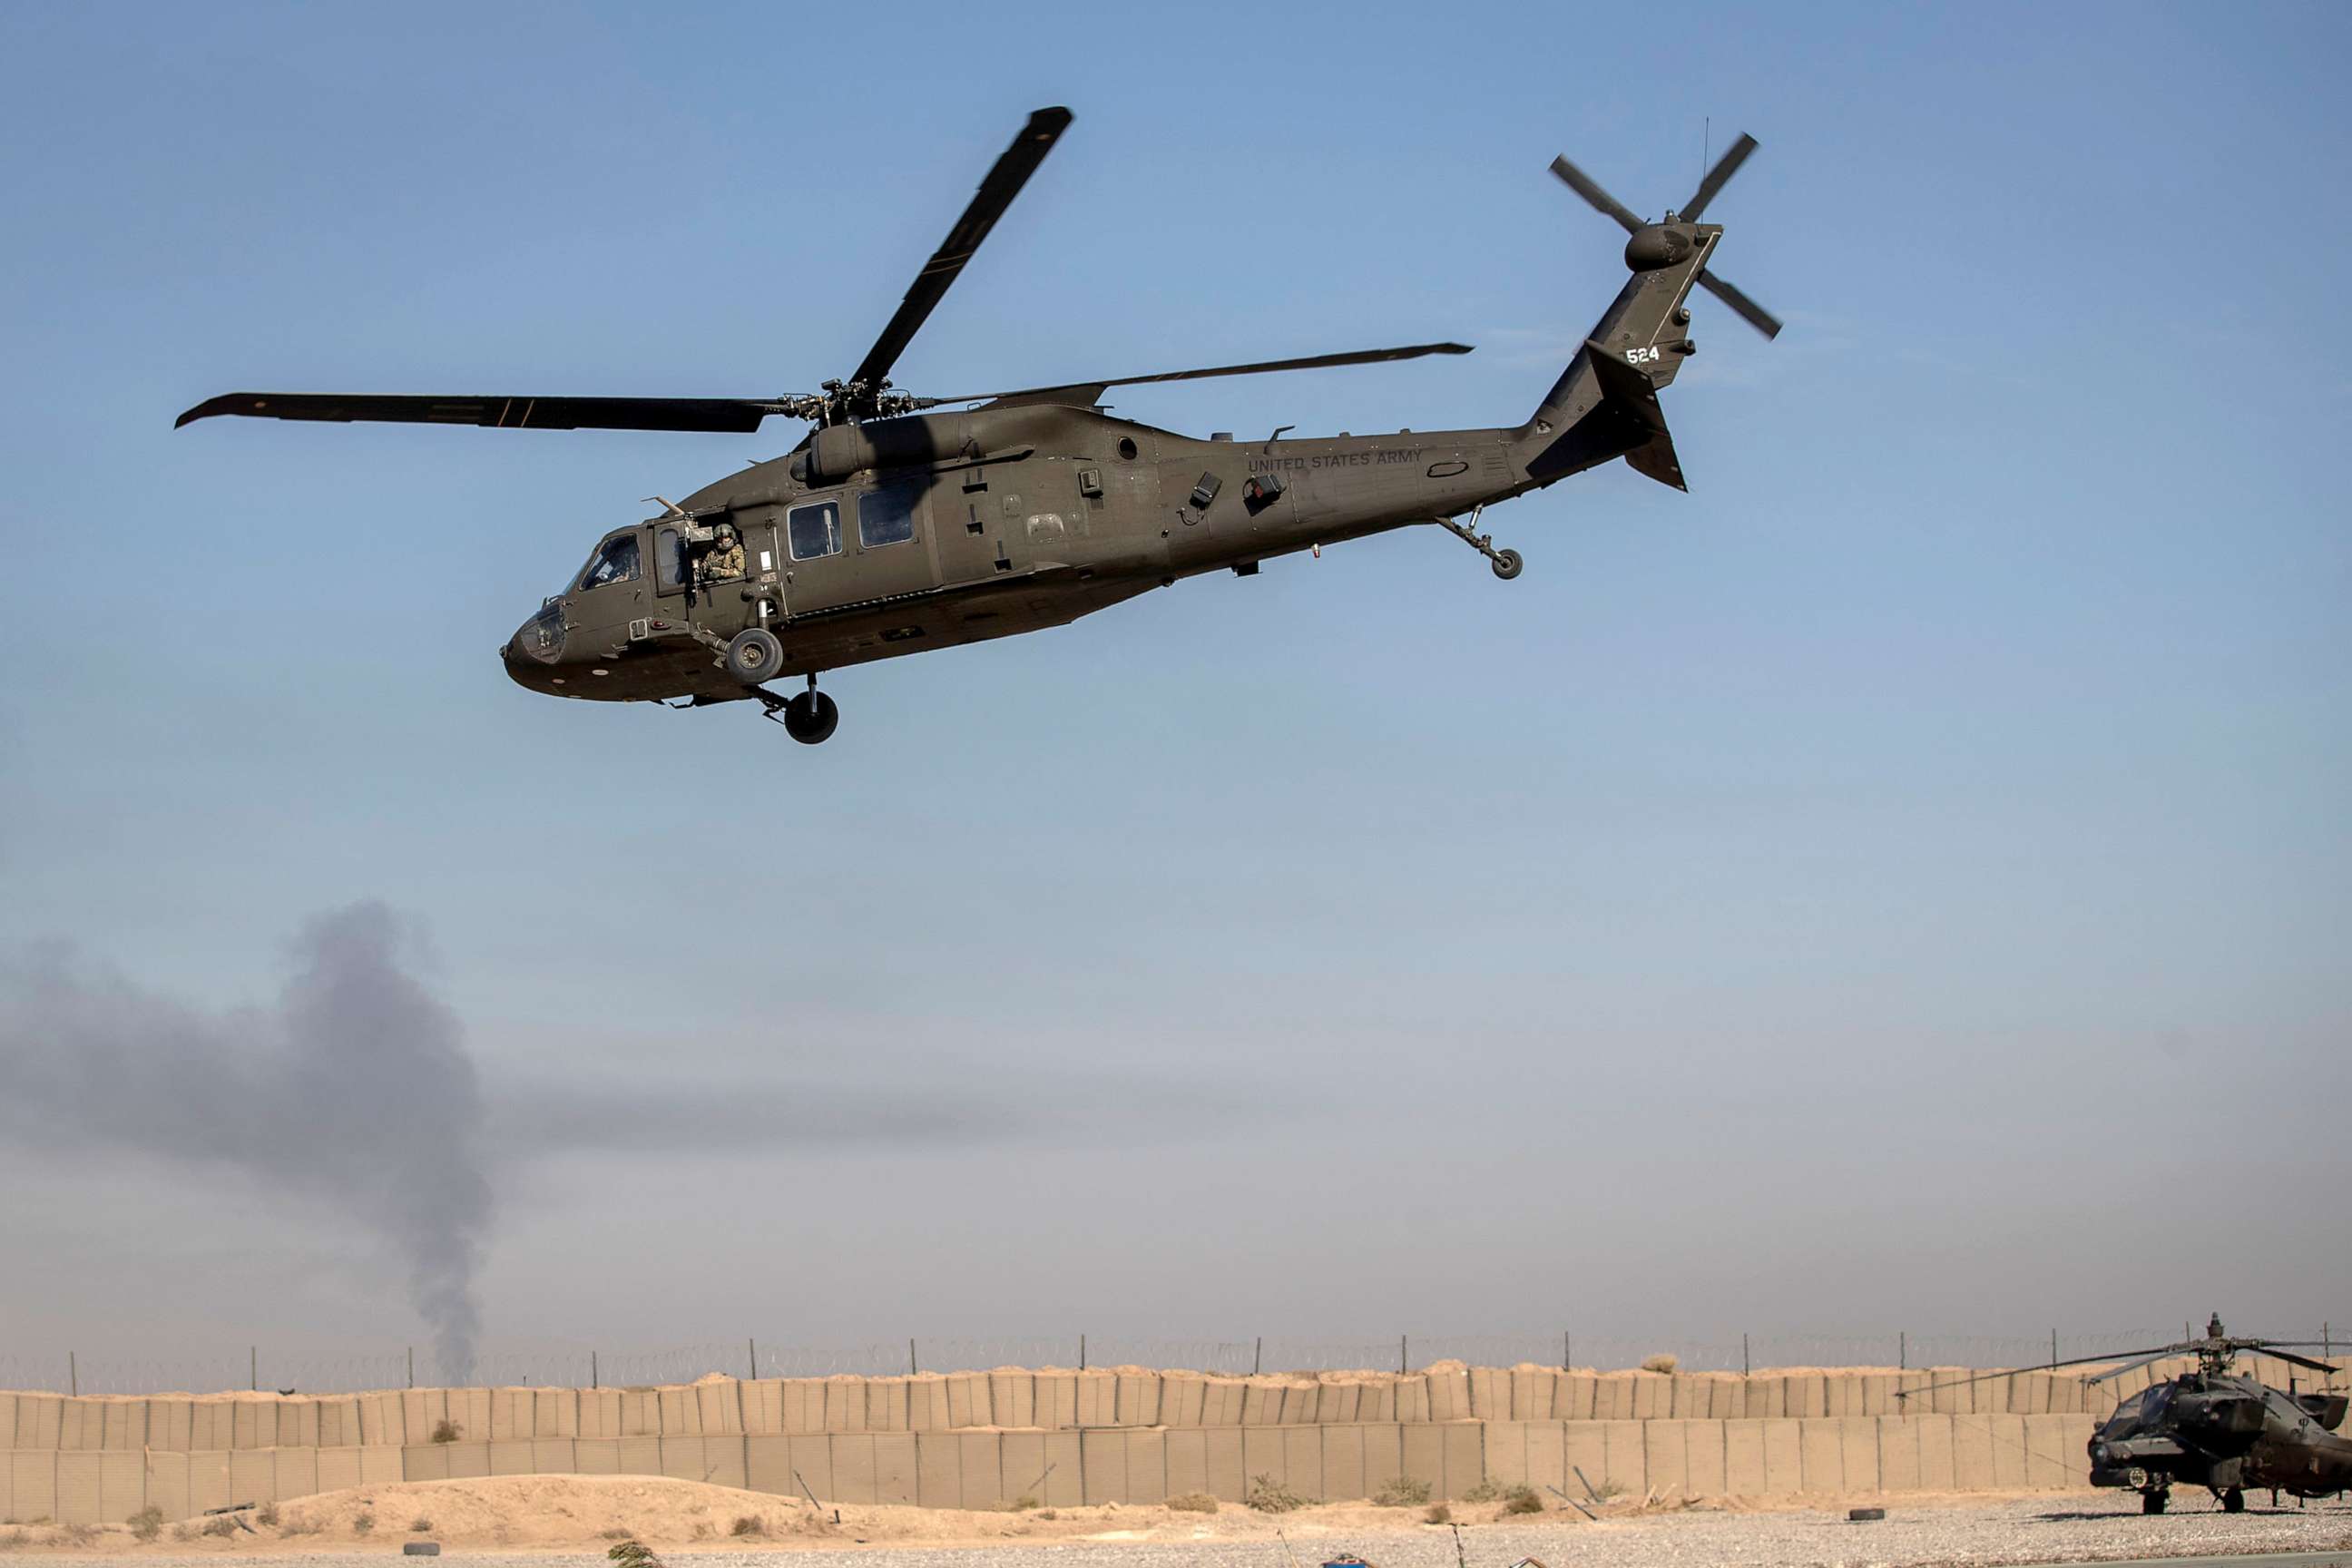 PHOTO: In this file photo from 2019, A helicopter takes off from a US military base at an undisclosed location in eastern Syria, Nov. 11, 2019.